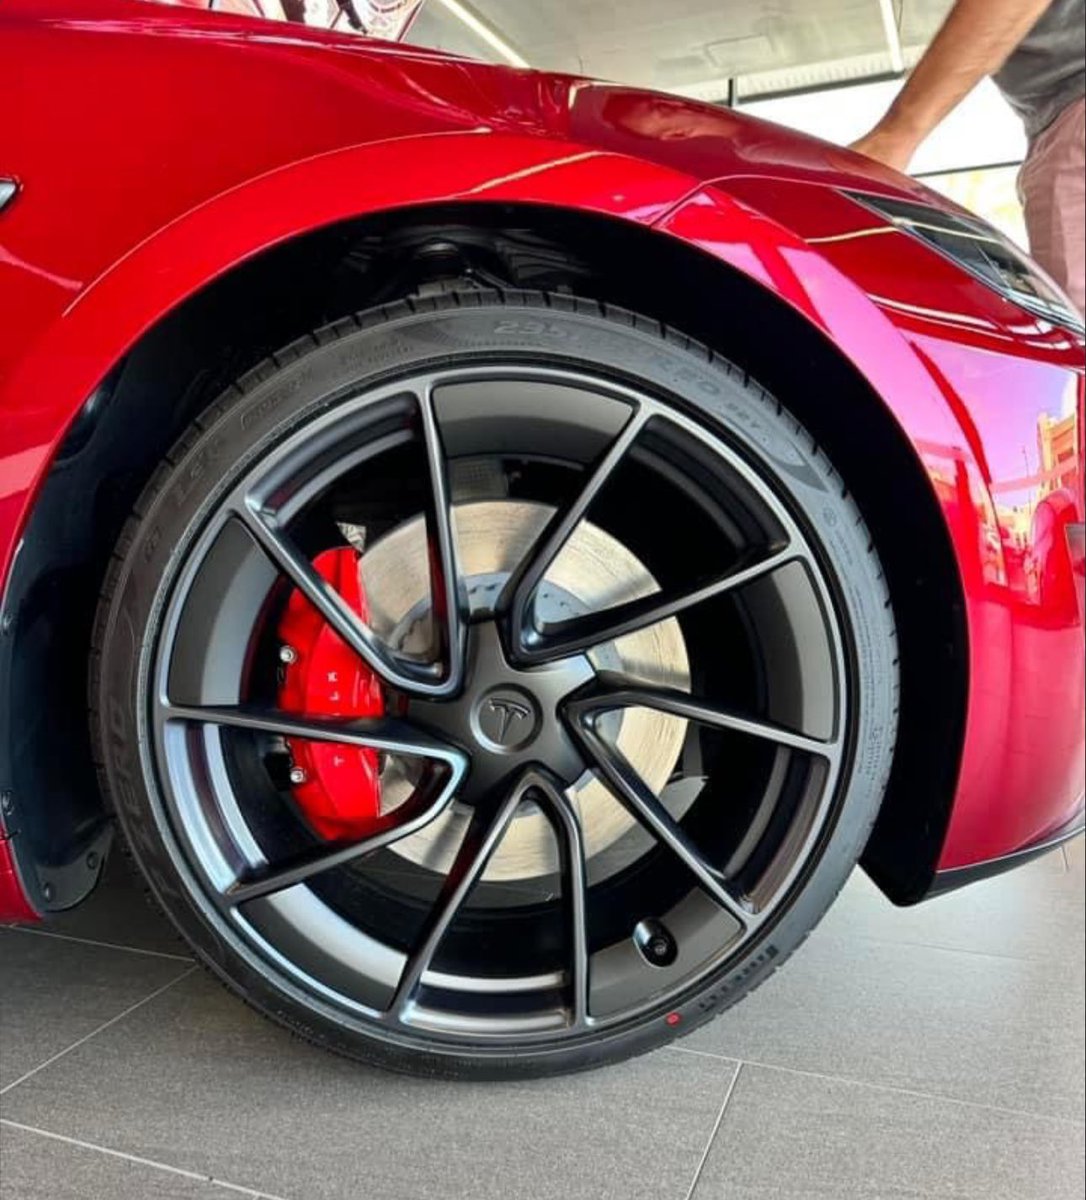 🔥Model 3 Performance 20” wheels🔥

Finally we can clearly see the brand new M3P wheels without the long 💩 areos!🔥👀

As I said since day 1, this will be my choice and it looks SO COOL, giving space to the new calipers🔥⚡️

#tsla #tesla #model3performance #ludicrous #highland